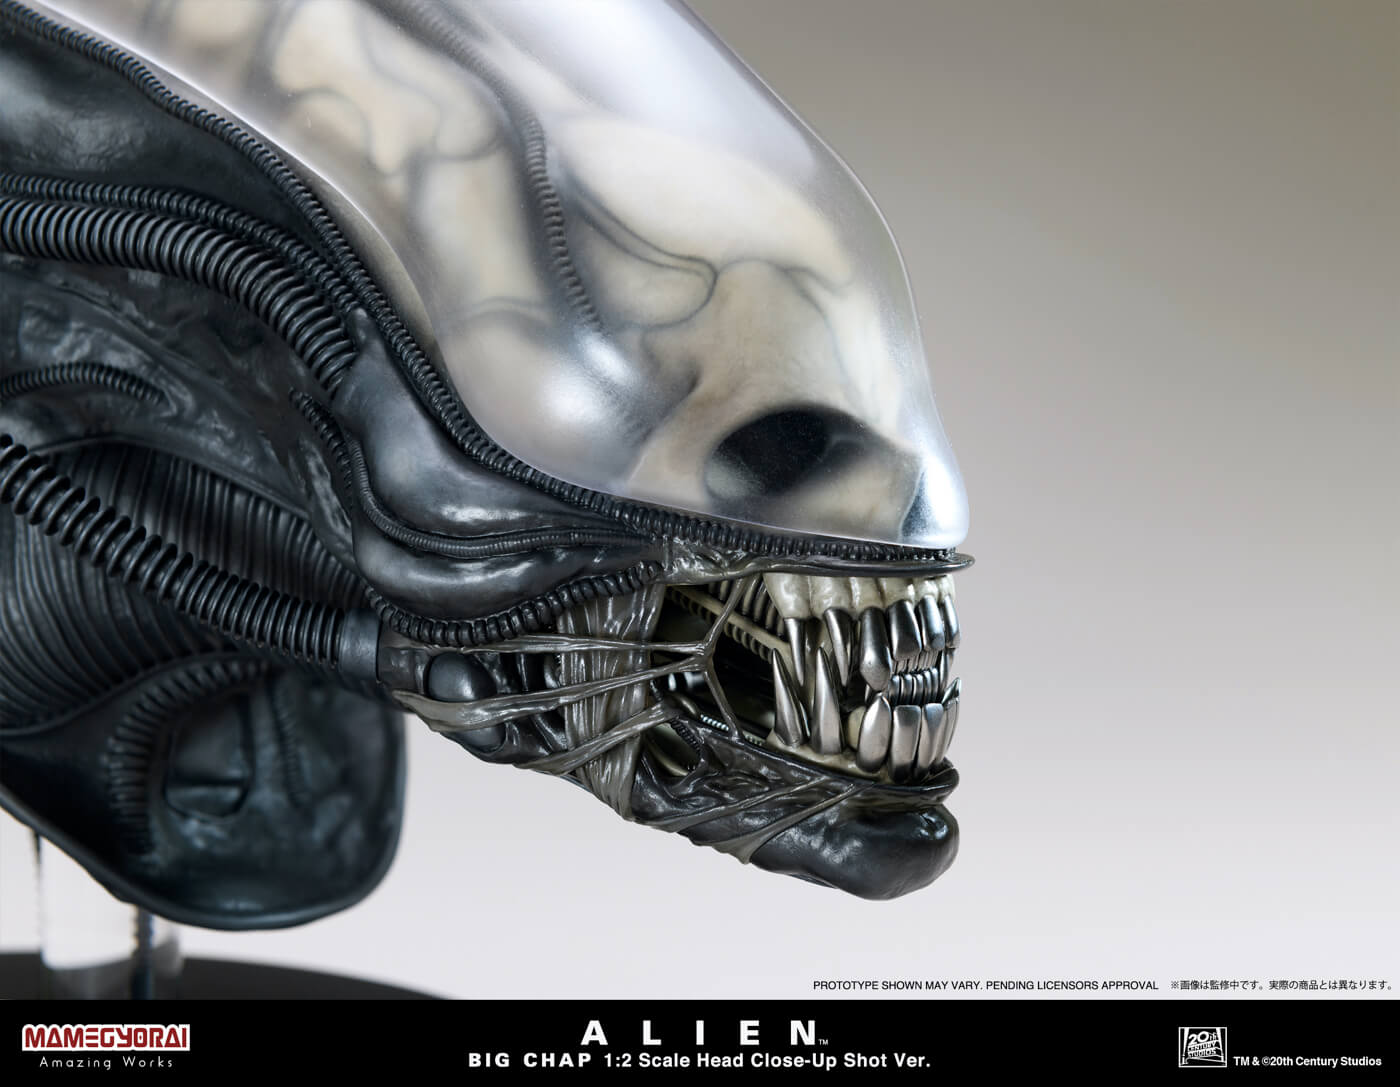 ALIEN BIG CHAP 1/2 SCALE HEAD Close Up Shot Ver.│Presented by 